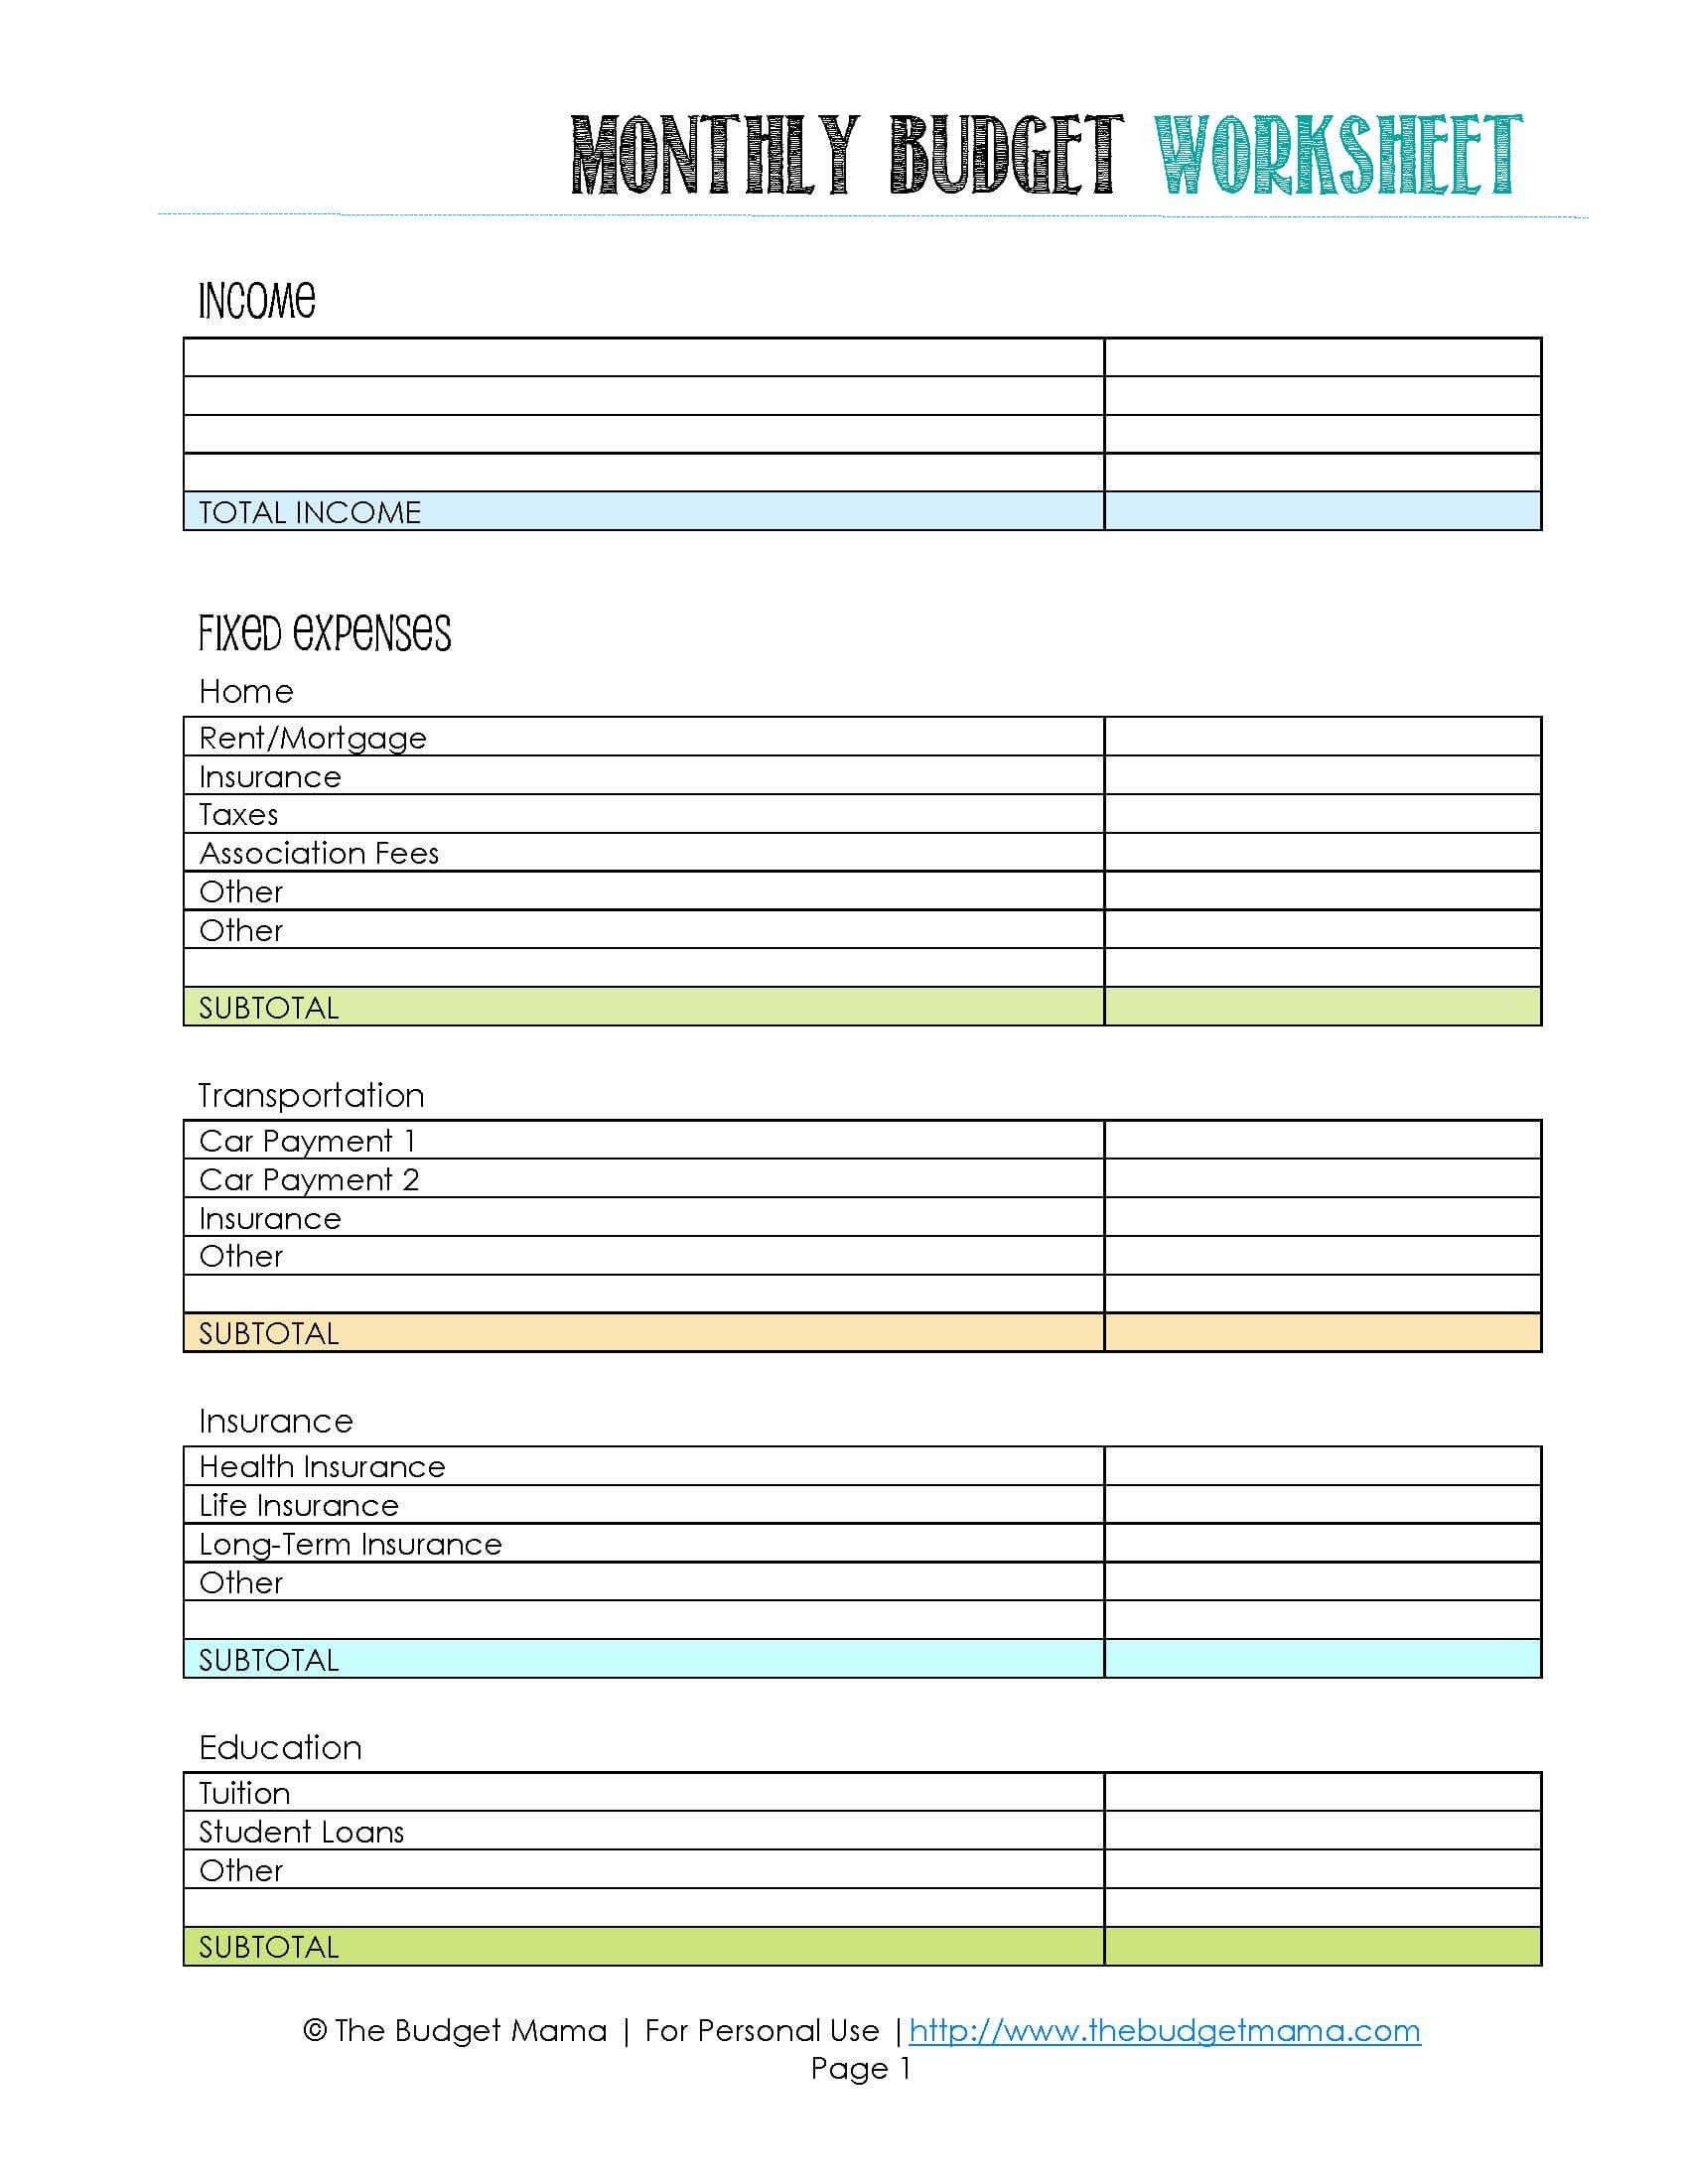 The Beginner's Guide To Budgeting  Jessi Fearon As Well As Printable Budget Worksheet